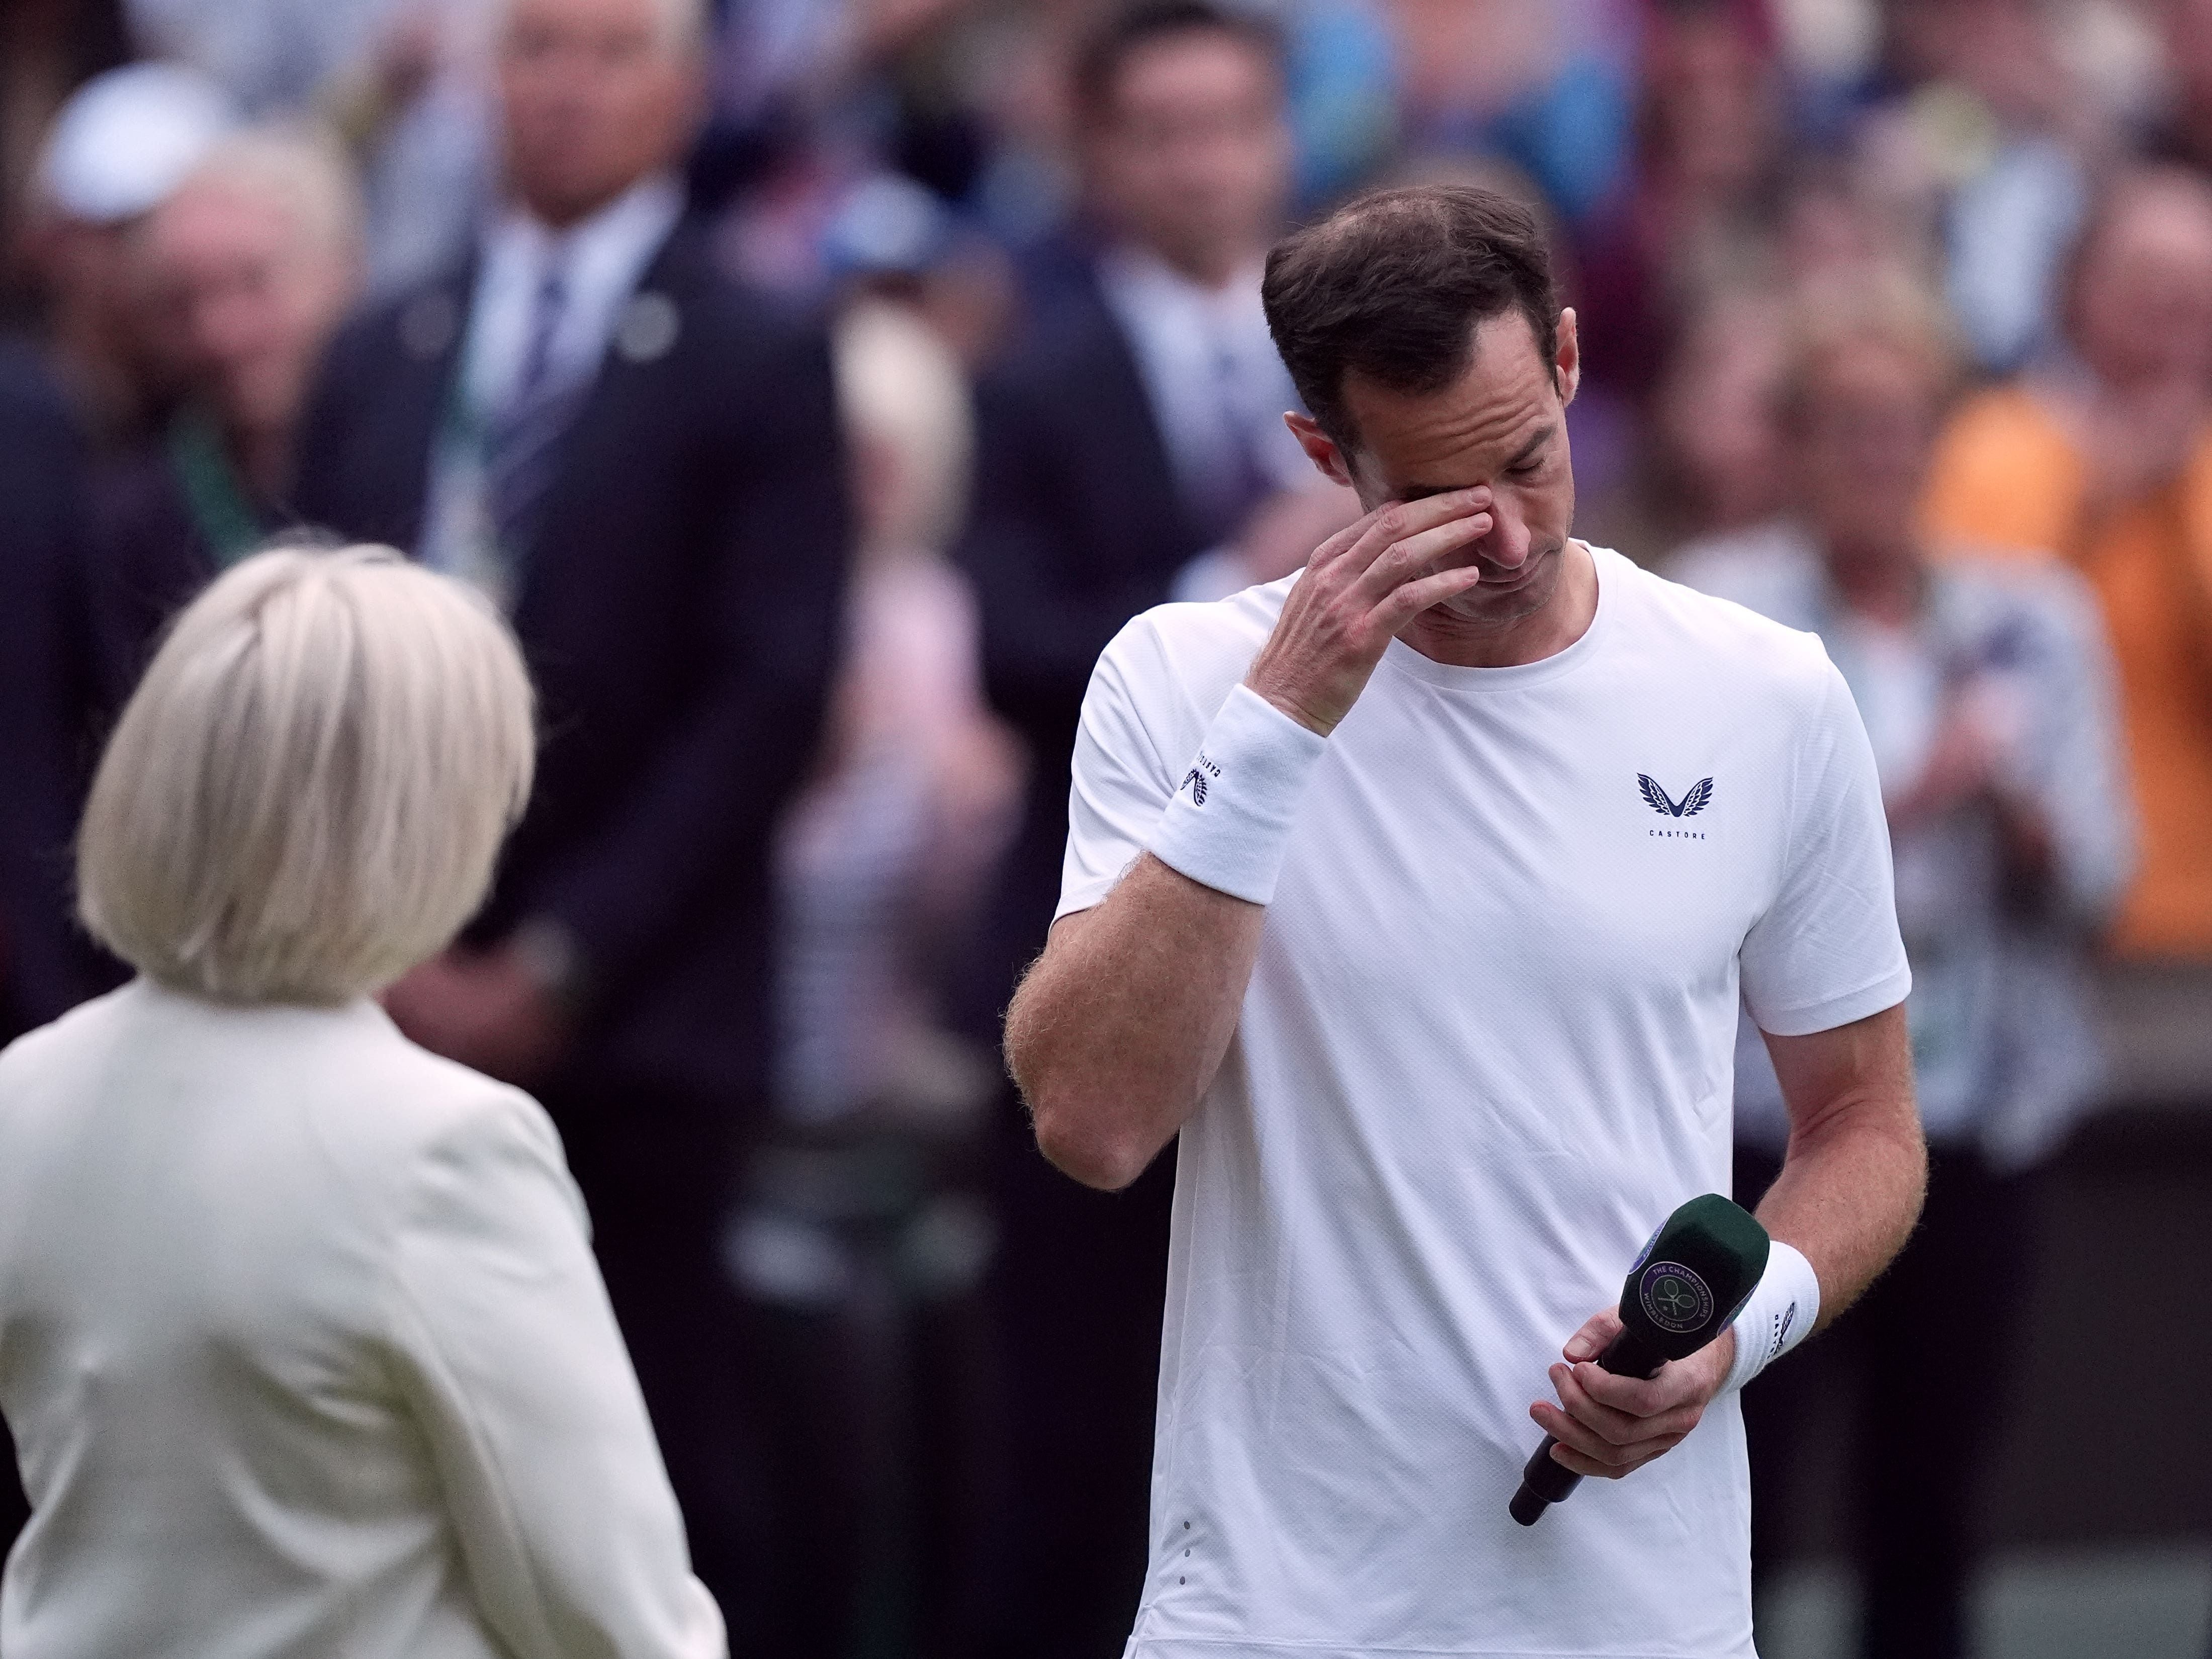 Andy Murray honoured on Centre Court as he nears end of Wimbledon career